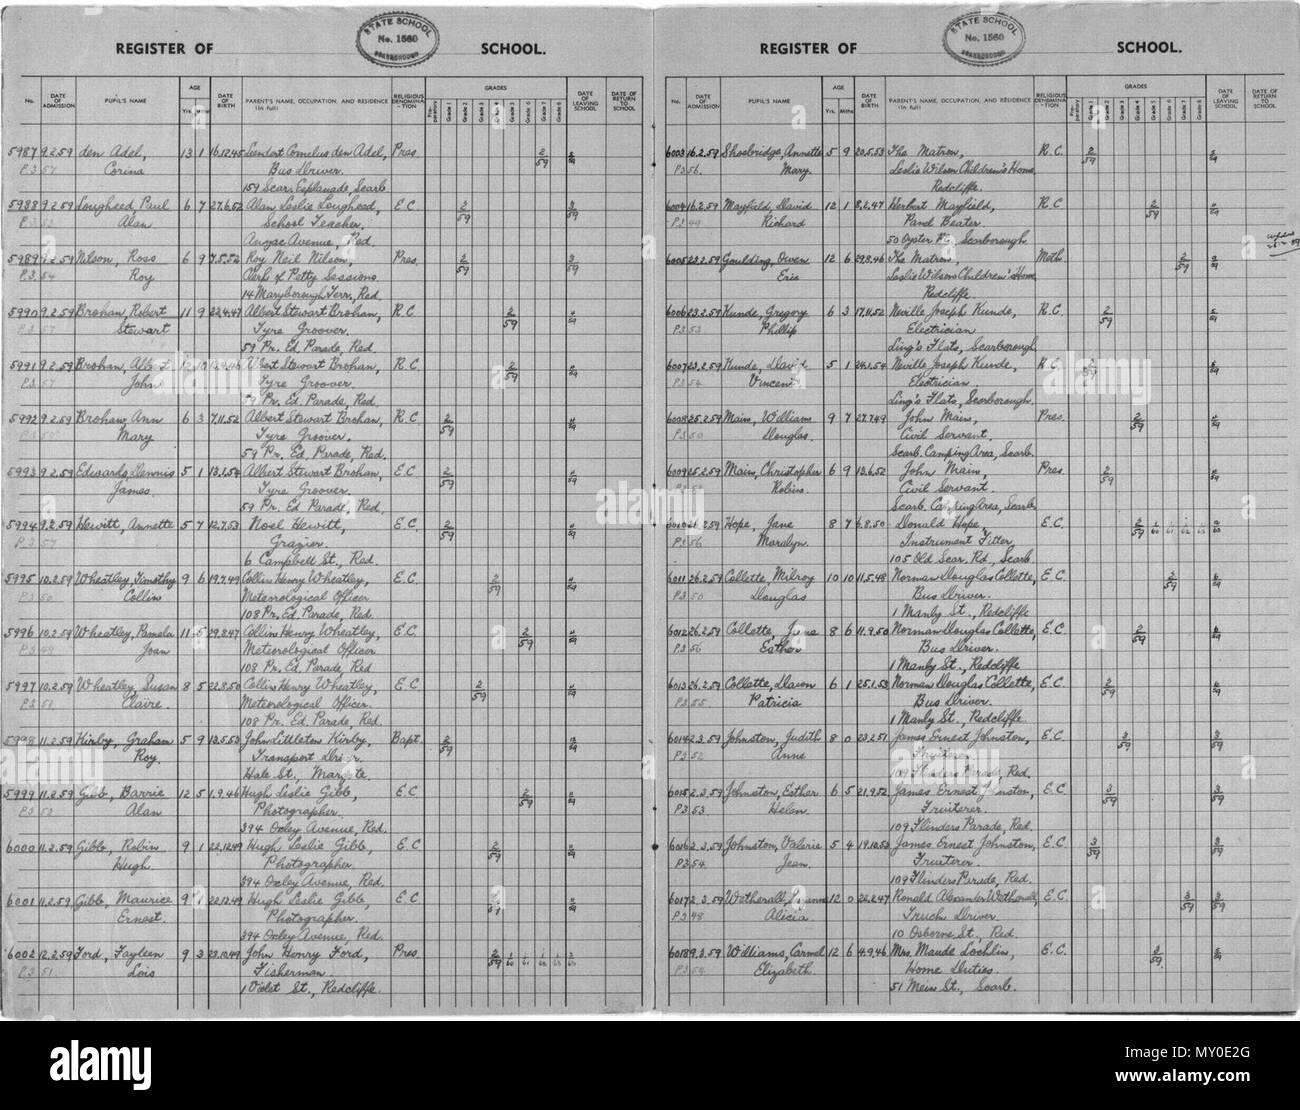 Scarborough State School - Admission record for Maurice, Barry and. School admission register for Scarborough State School from February 1959. Among the students enrolled are Barrie (Barry) Alan Gibb, Robin Hugh Gibb and Maurice Ernest Gibb, later known as the Bee Gees. Stock Photo